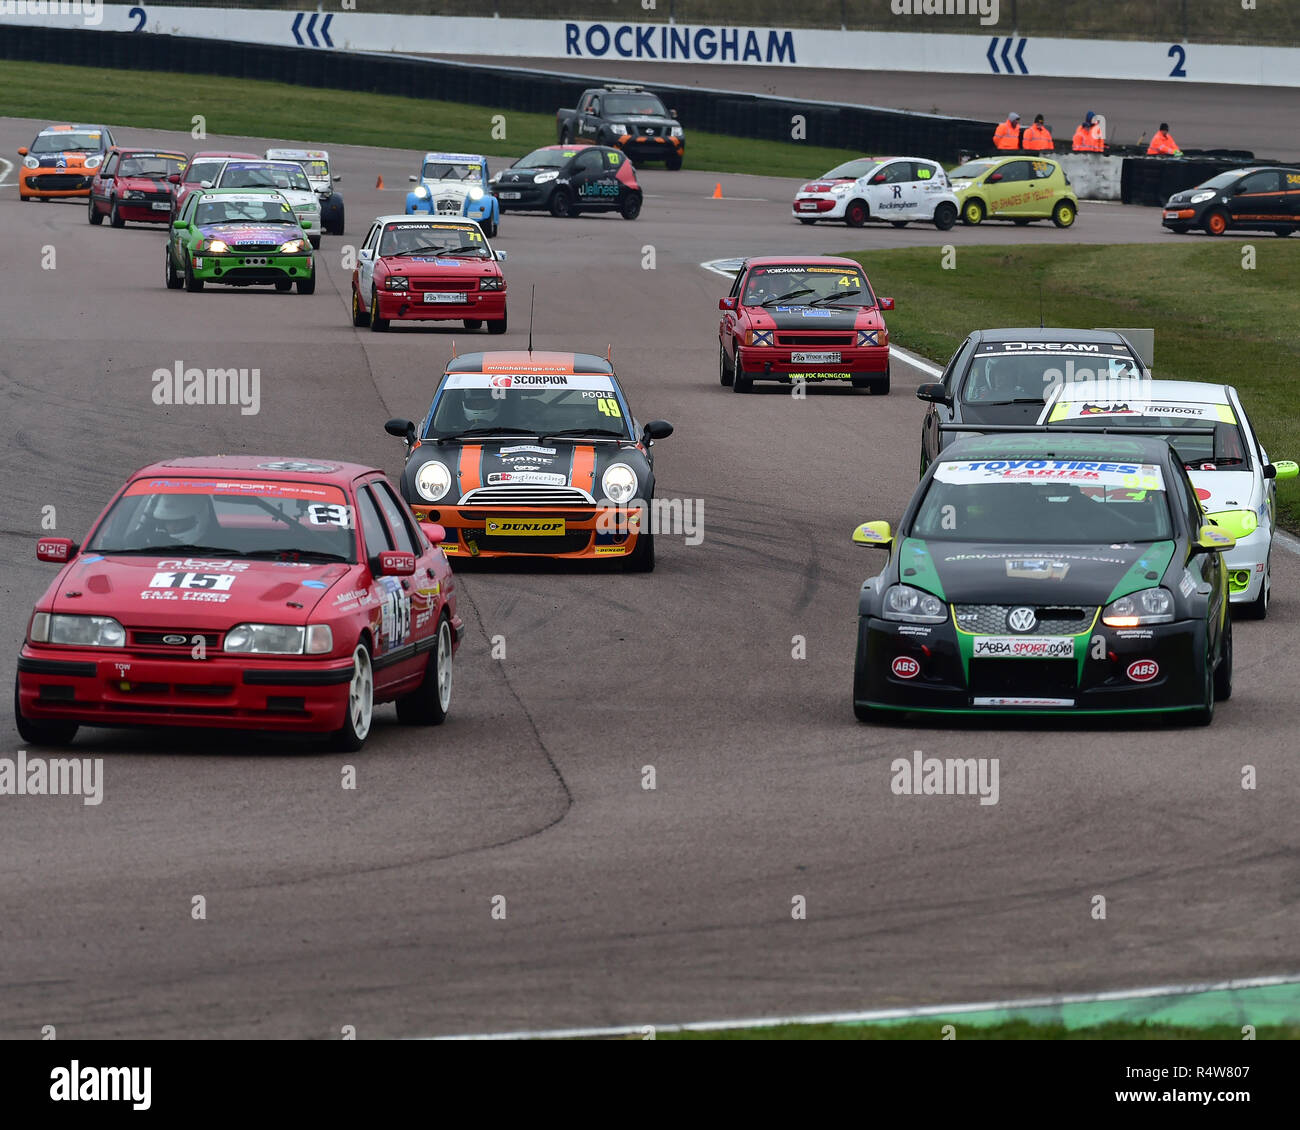 The approach to Yentwood, Saloons Race, Rockingham Super Send-Off, Rockingham Motorsport Speedway, Saturday, 25th November, 2018, Autosport, cars, Eng Stock Photo